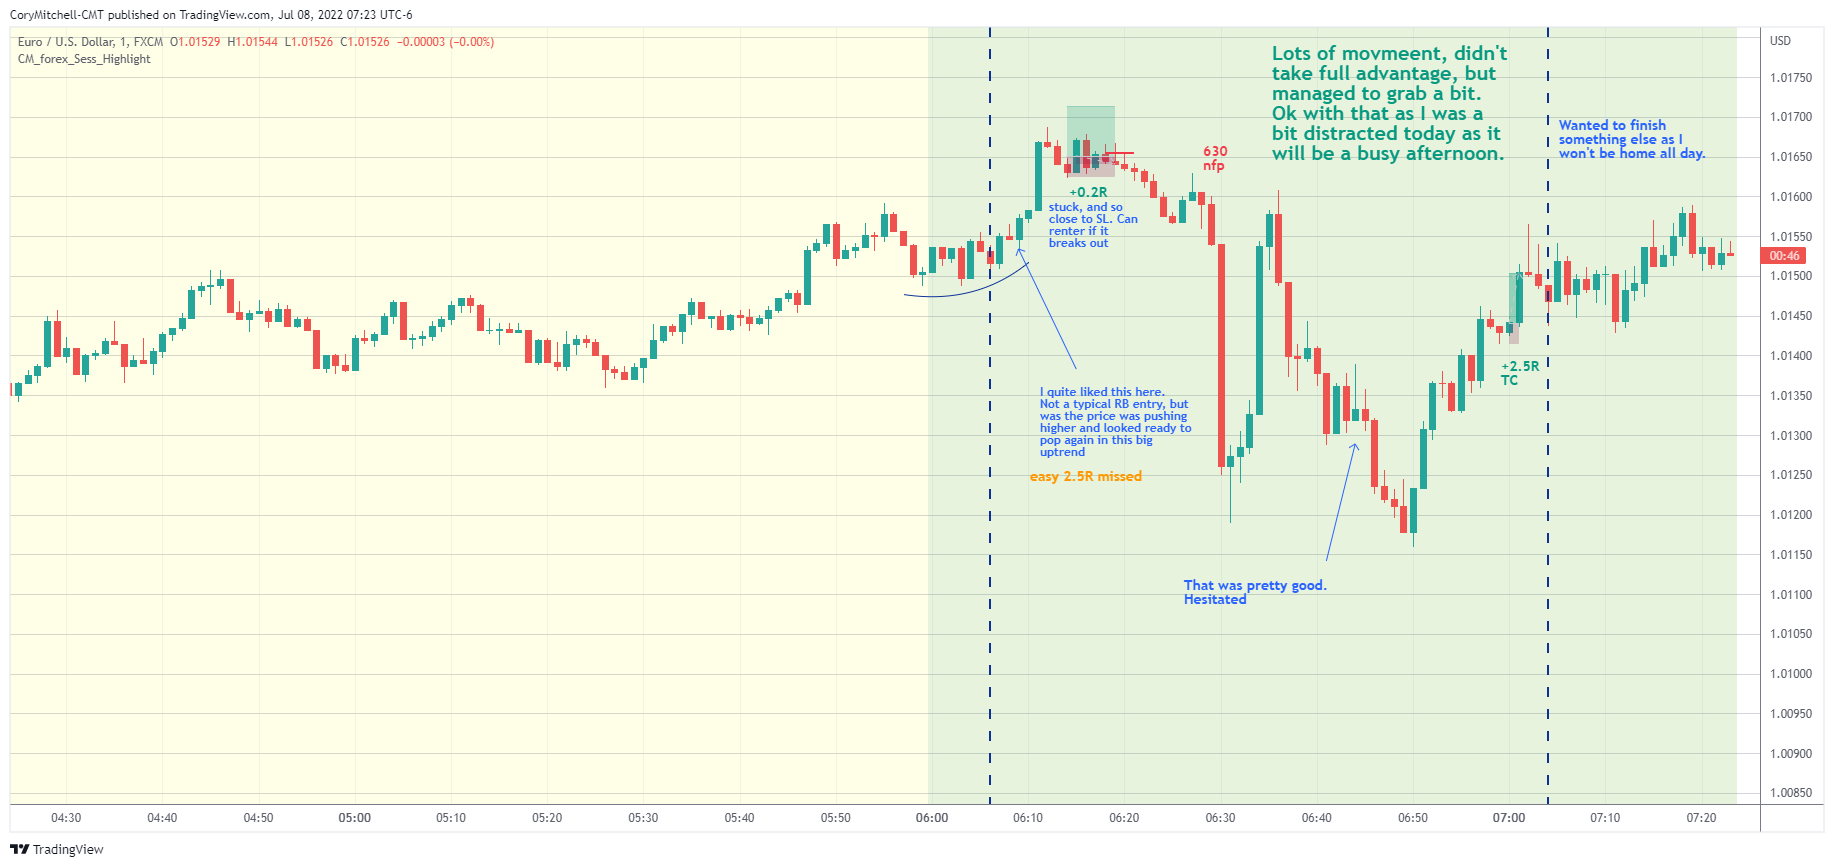 EURUSD day trading strategy examples July 8